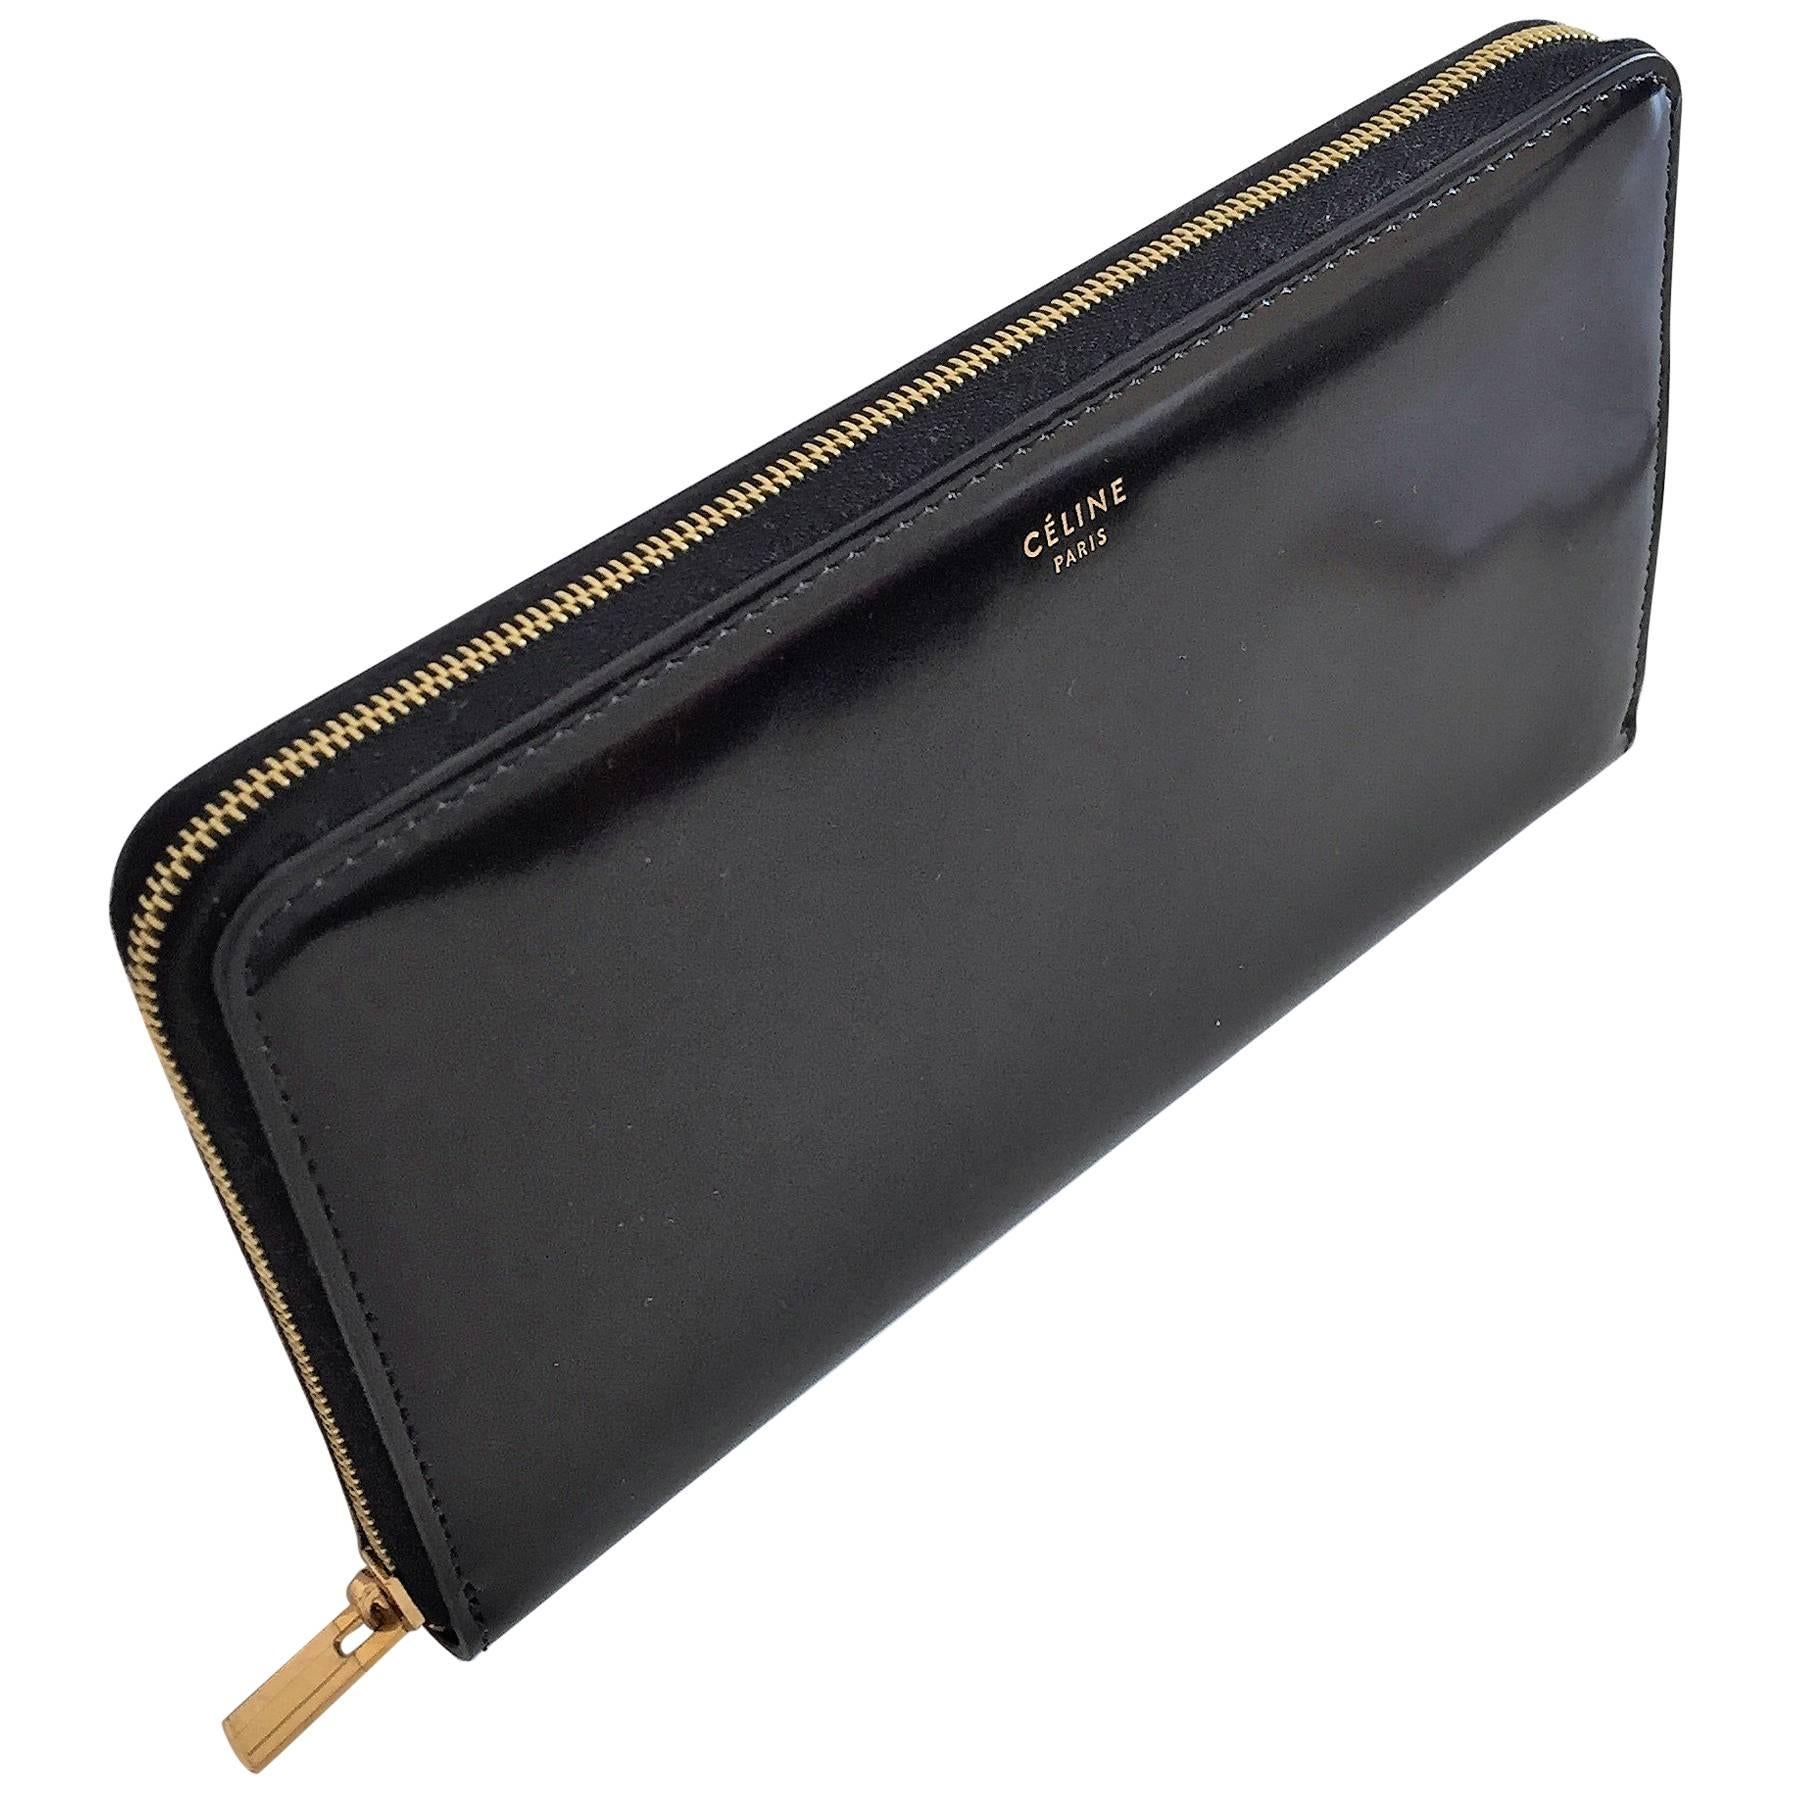 New Céline Large Zipper Wallet in Vernis Black Leather For Sale